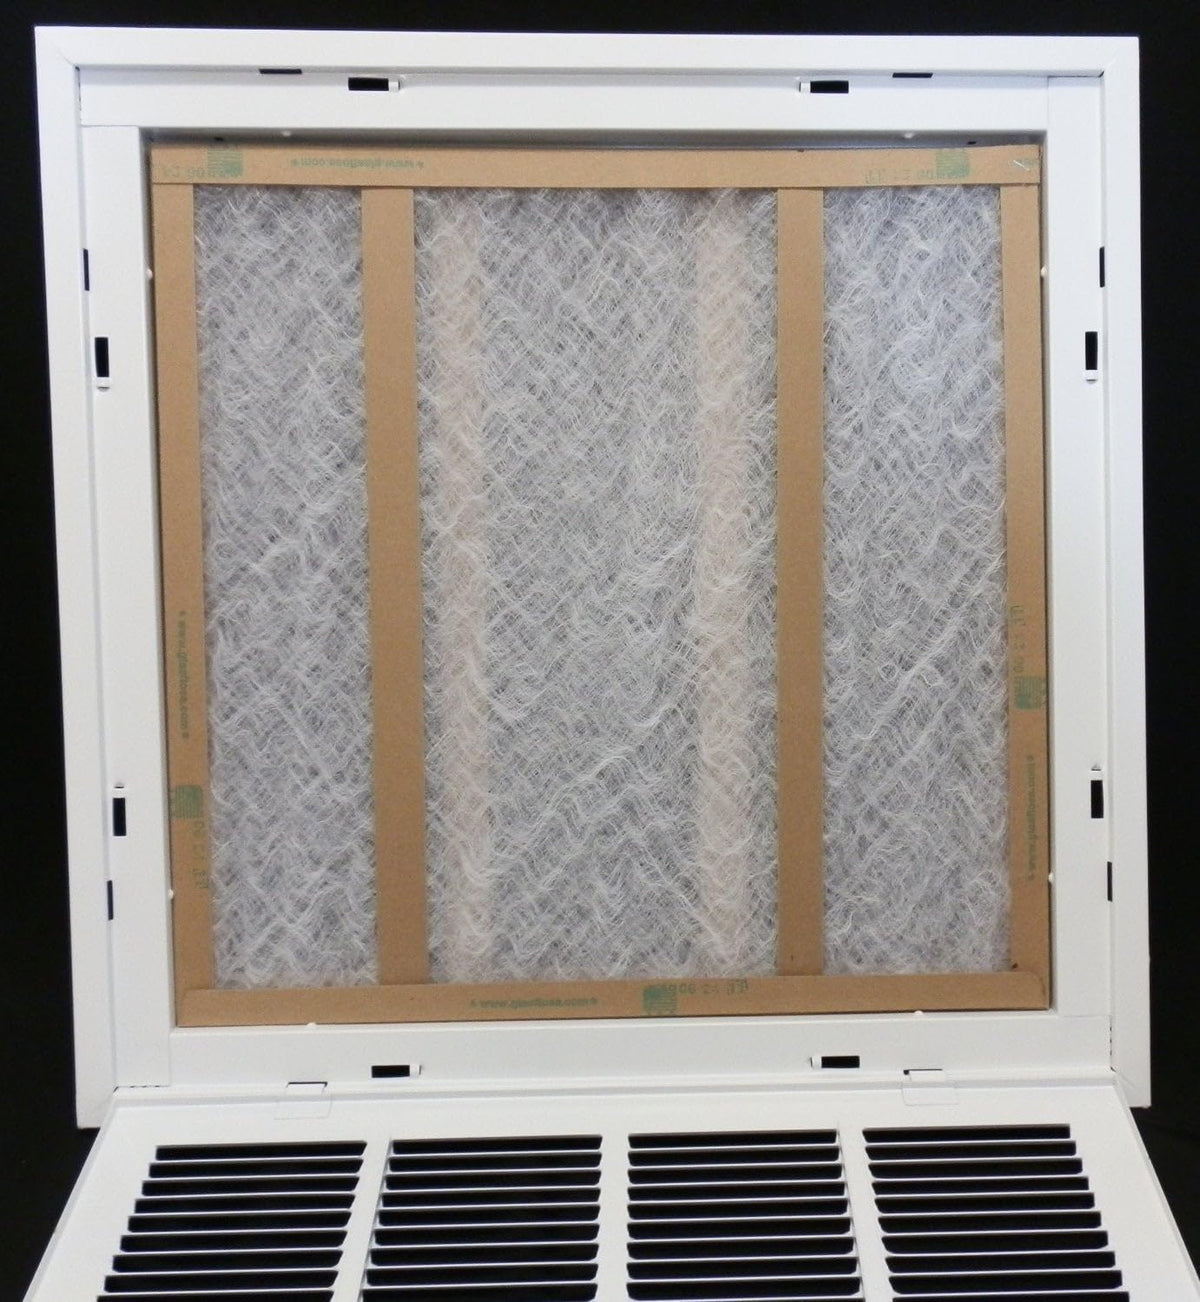 25&quot; X 20&quot; Steel Return Air Filter Grille for 1&quot; Filter - Removable Frame - * Filter Included * [Outer Dimensions: 26 5/8&quot; X 32 5/8&quot;]